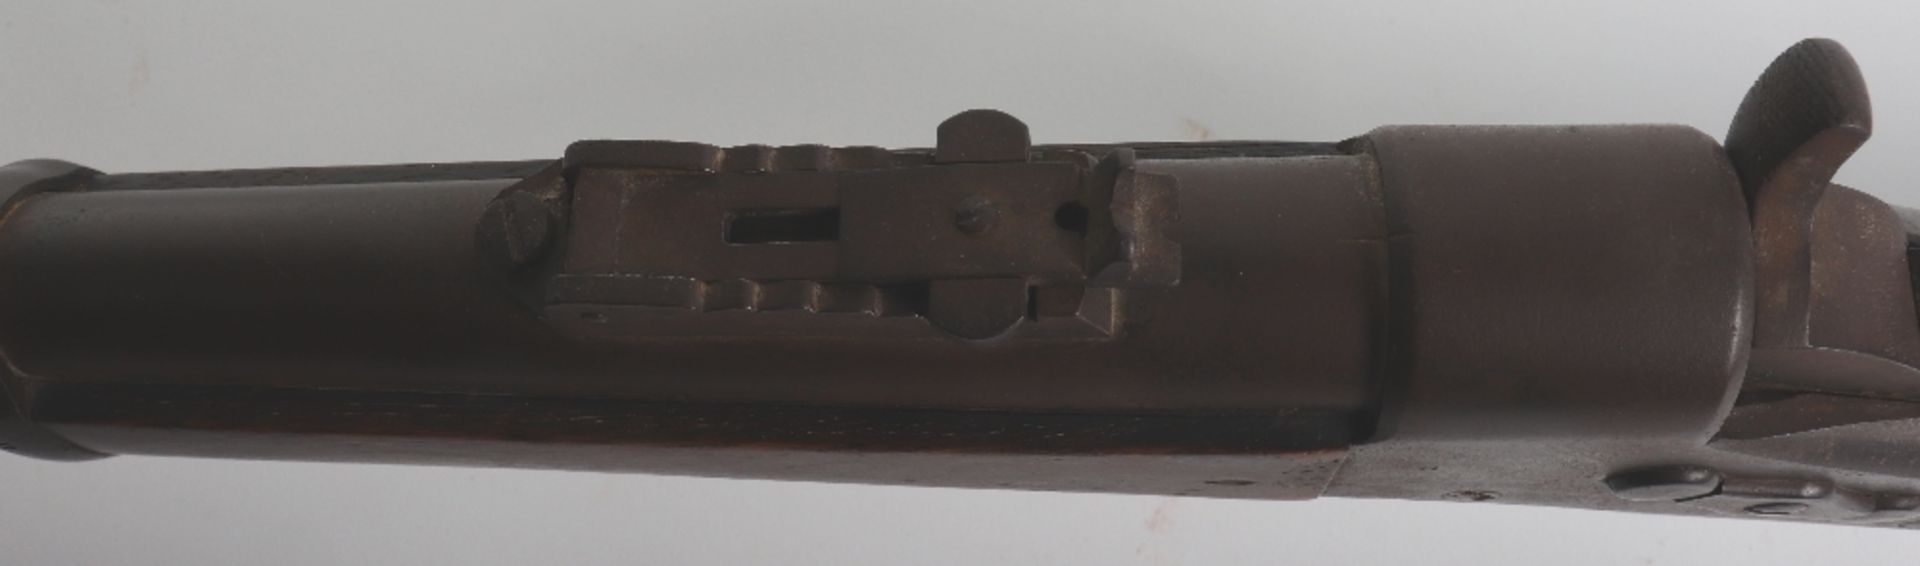 .43” Egyptian Contract Remington Rolling Block Military Rifle - Image 7 of 11